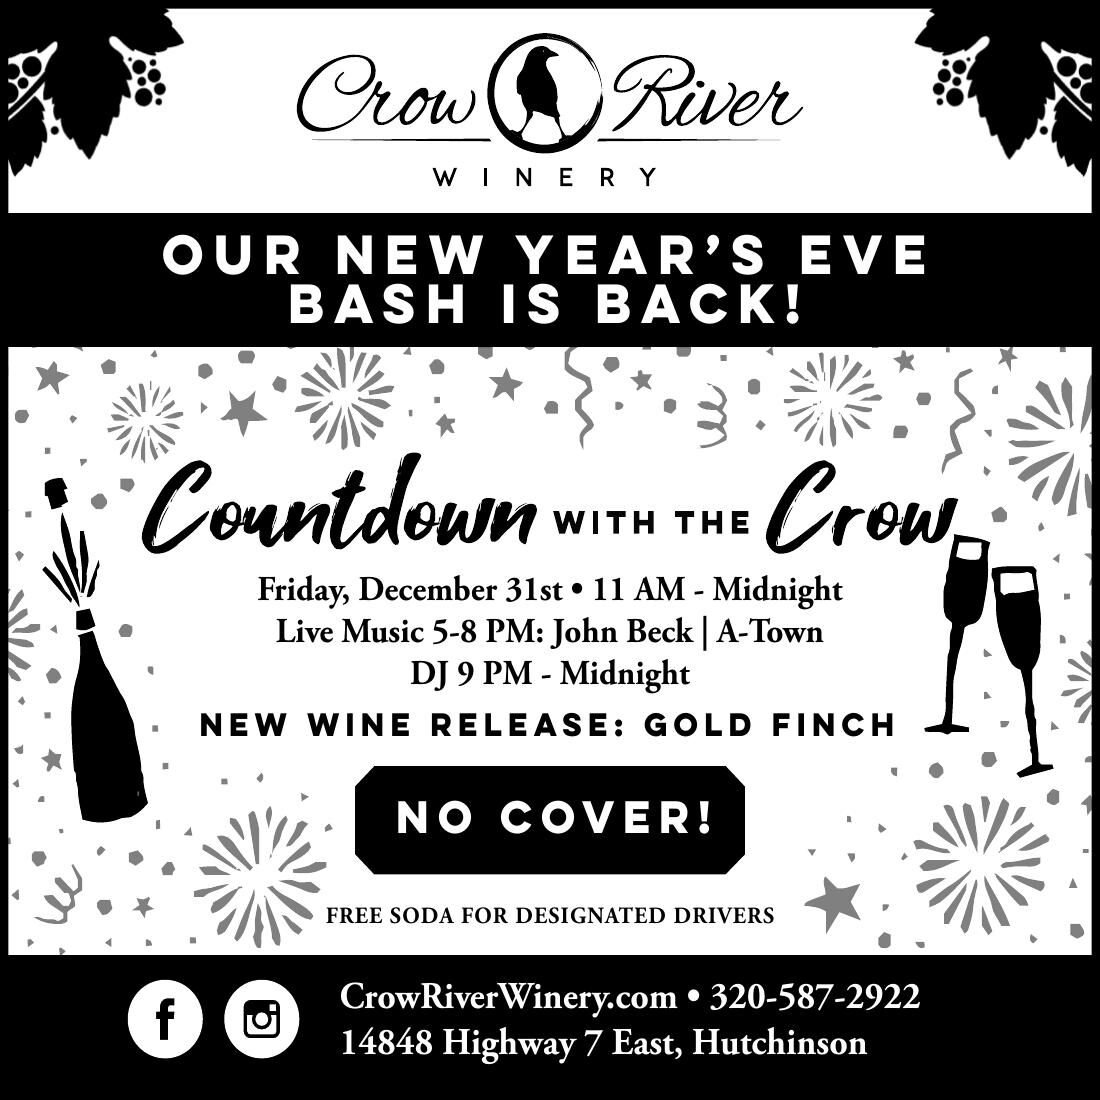 OUR NEW YEAR’S EVE bash is back!